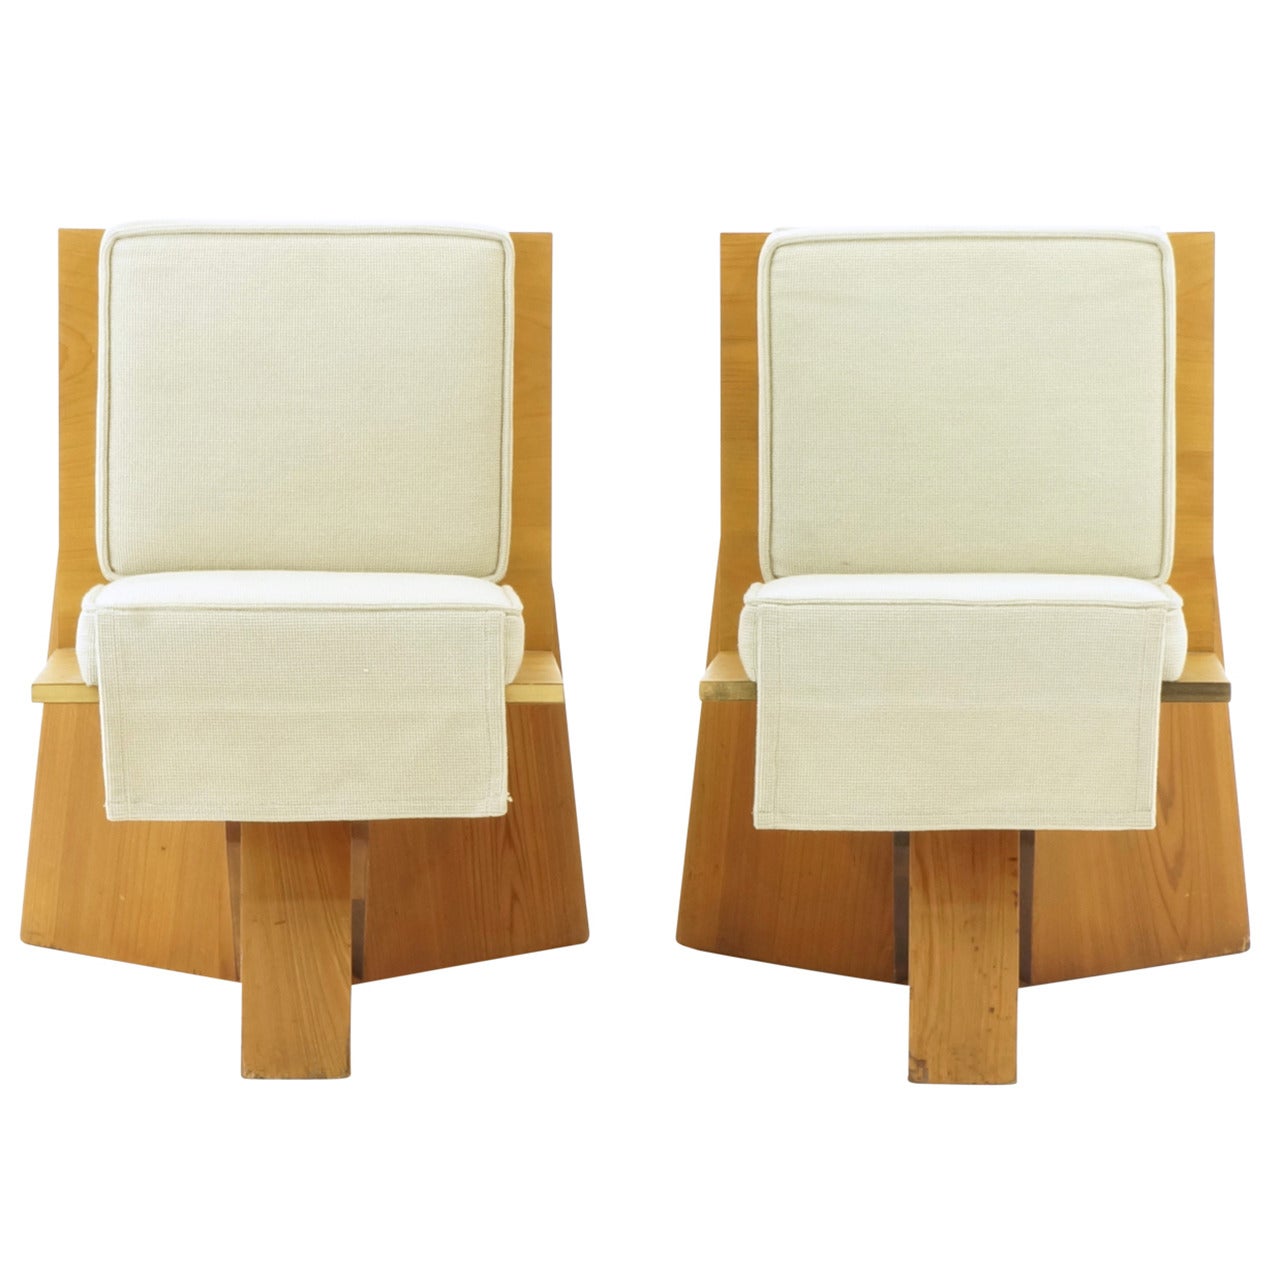 Pair of Frank Lloyd Wright Chairs from the Sondern House, Kansas City